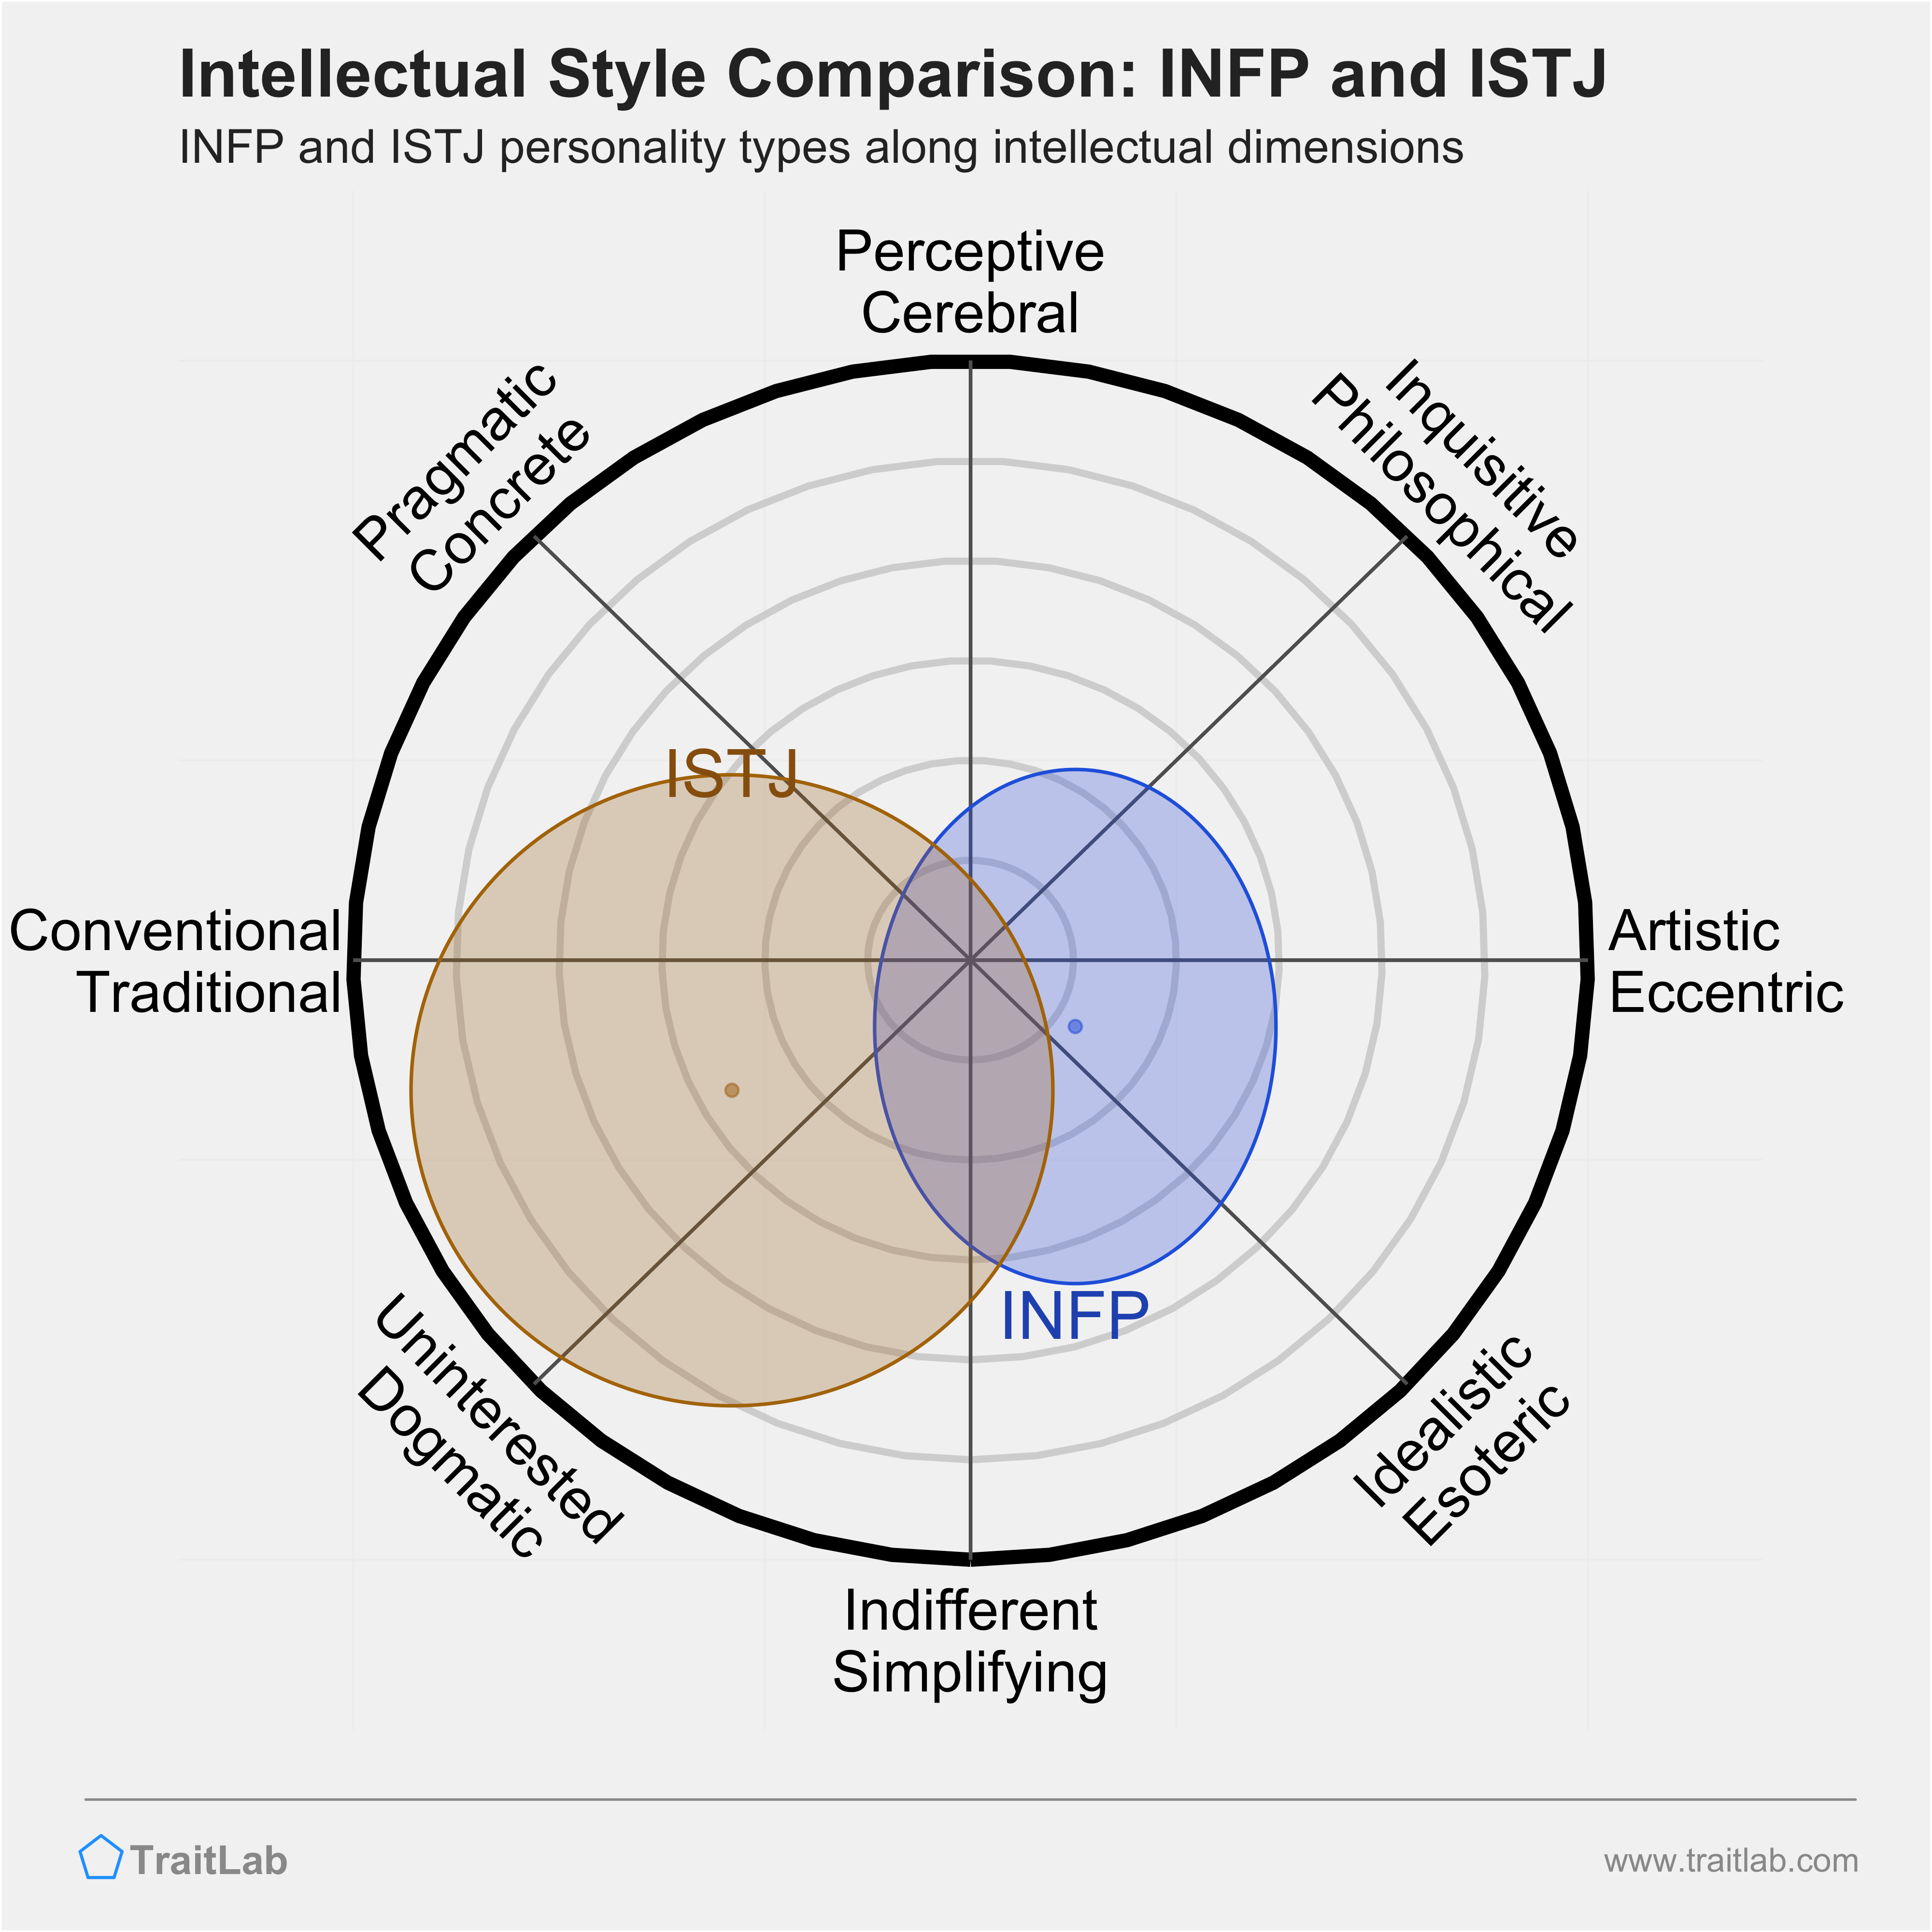 INFP and ISTJ comparison across intellectual dimensions